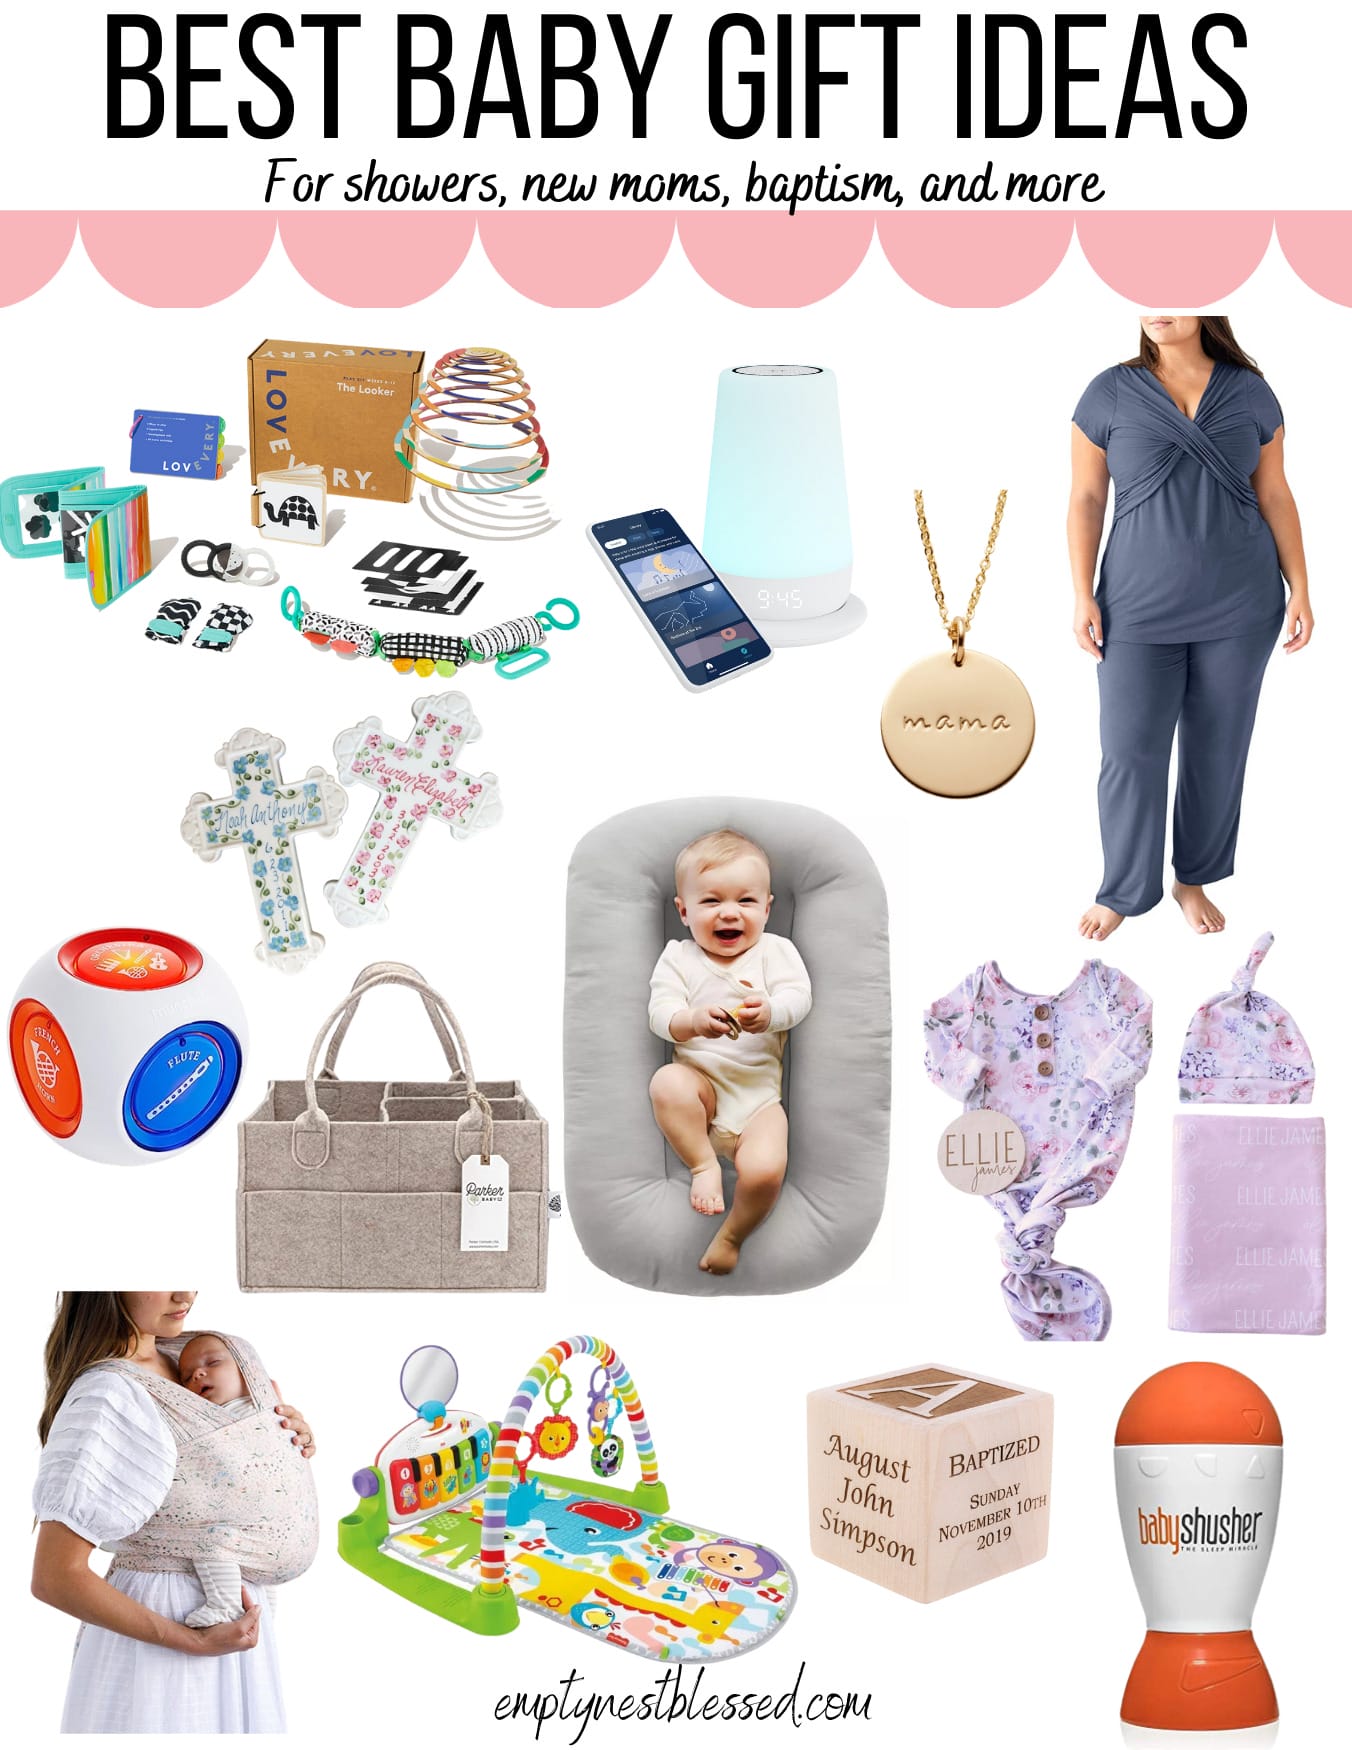 Lily's Little Learners: Pregnancy Must Haves Guide